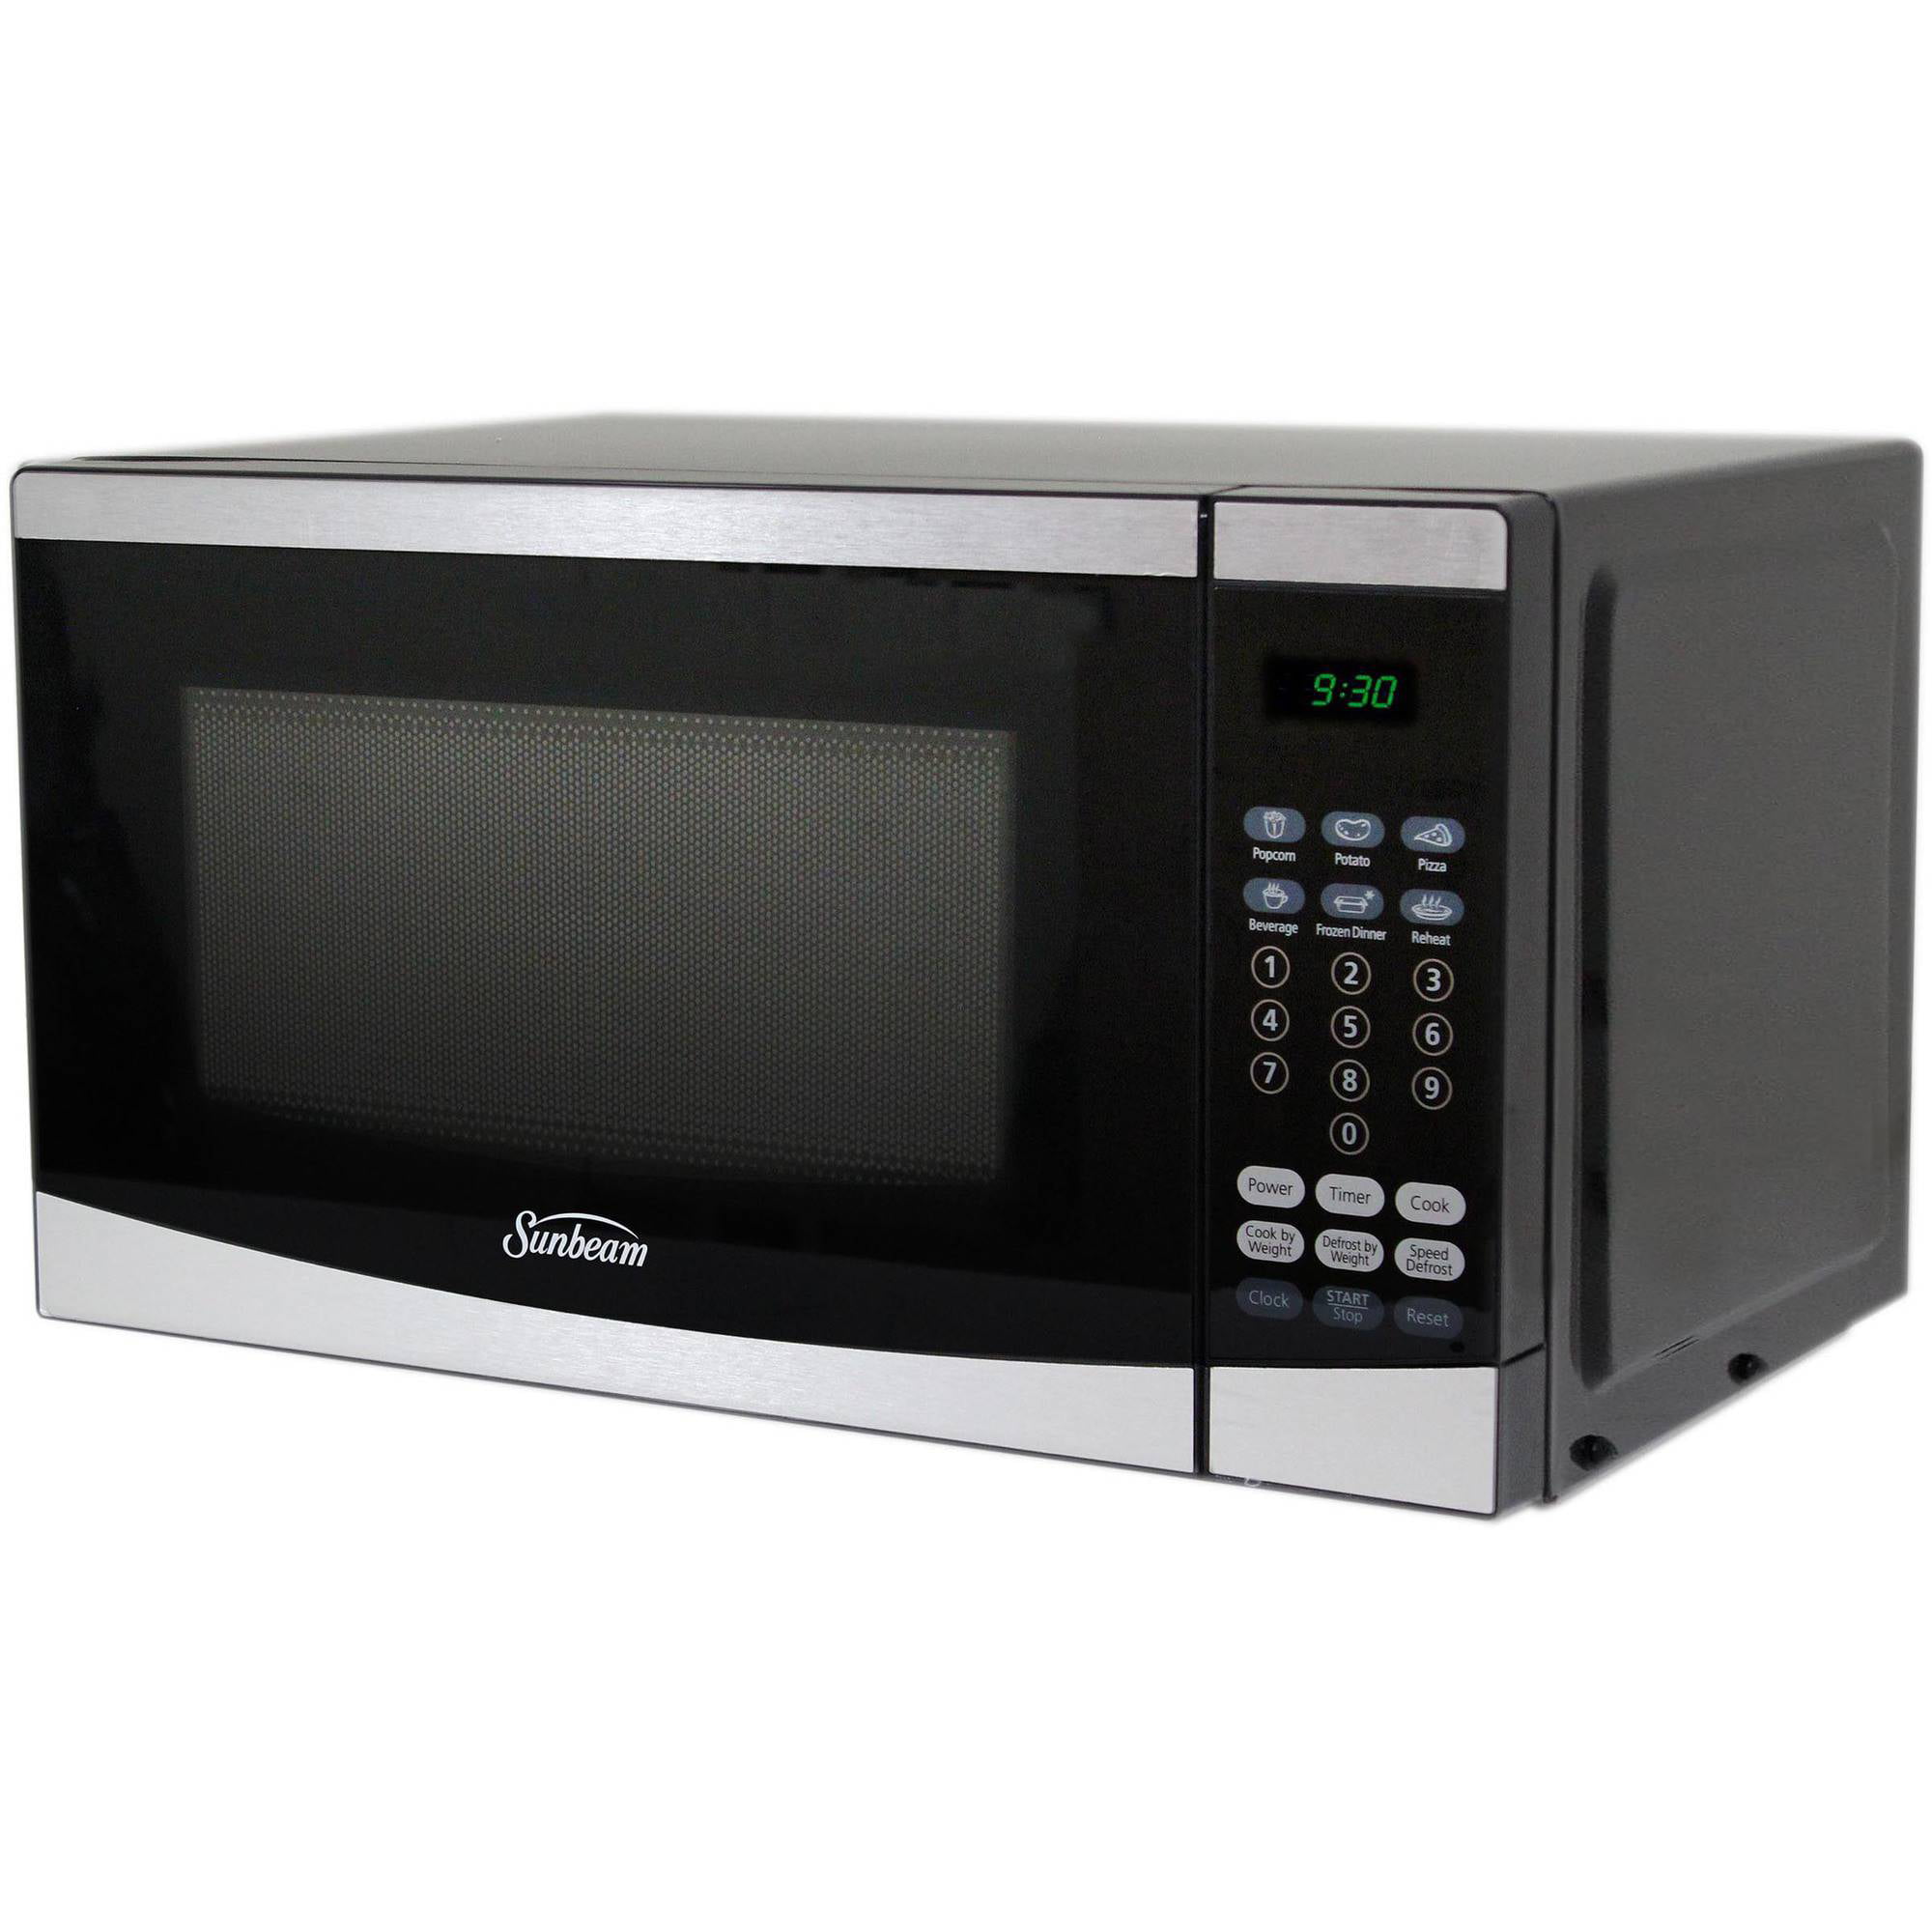 Best Sunbeam Microwave “brand New” Never Used for sale in Newburgh